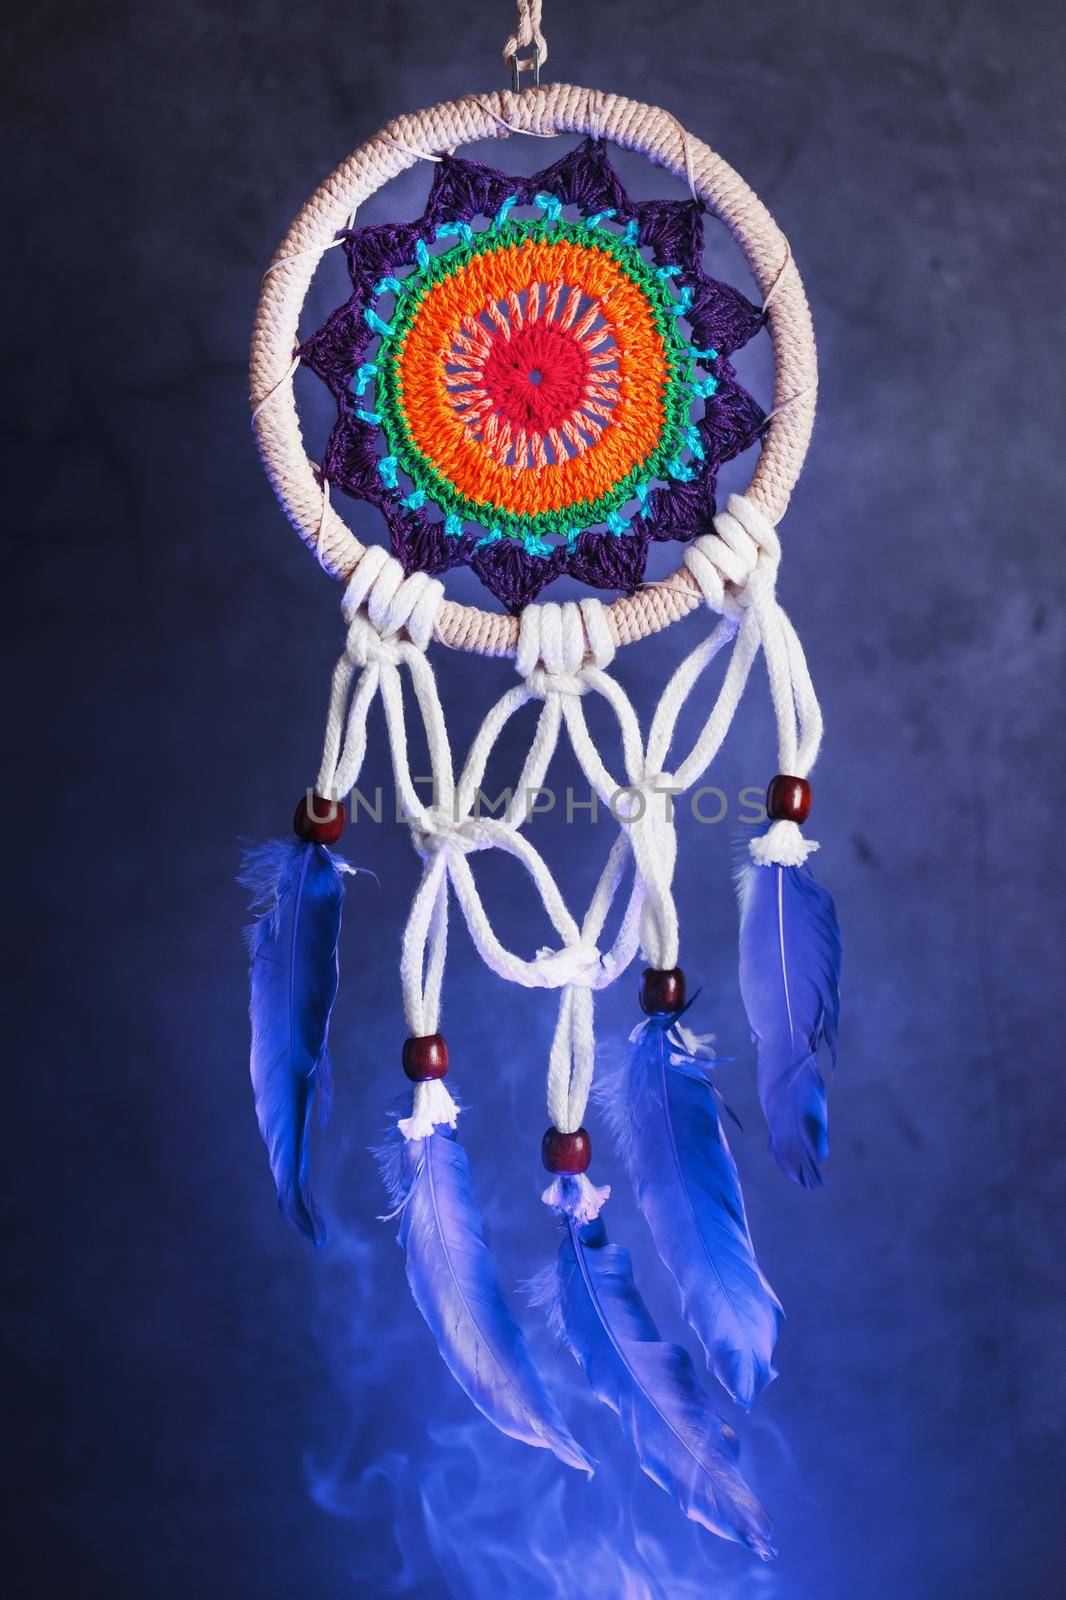 Dream catcher on a dark background with smoke and aquamarine light. Isolate